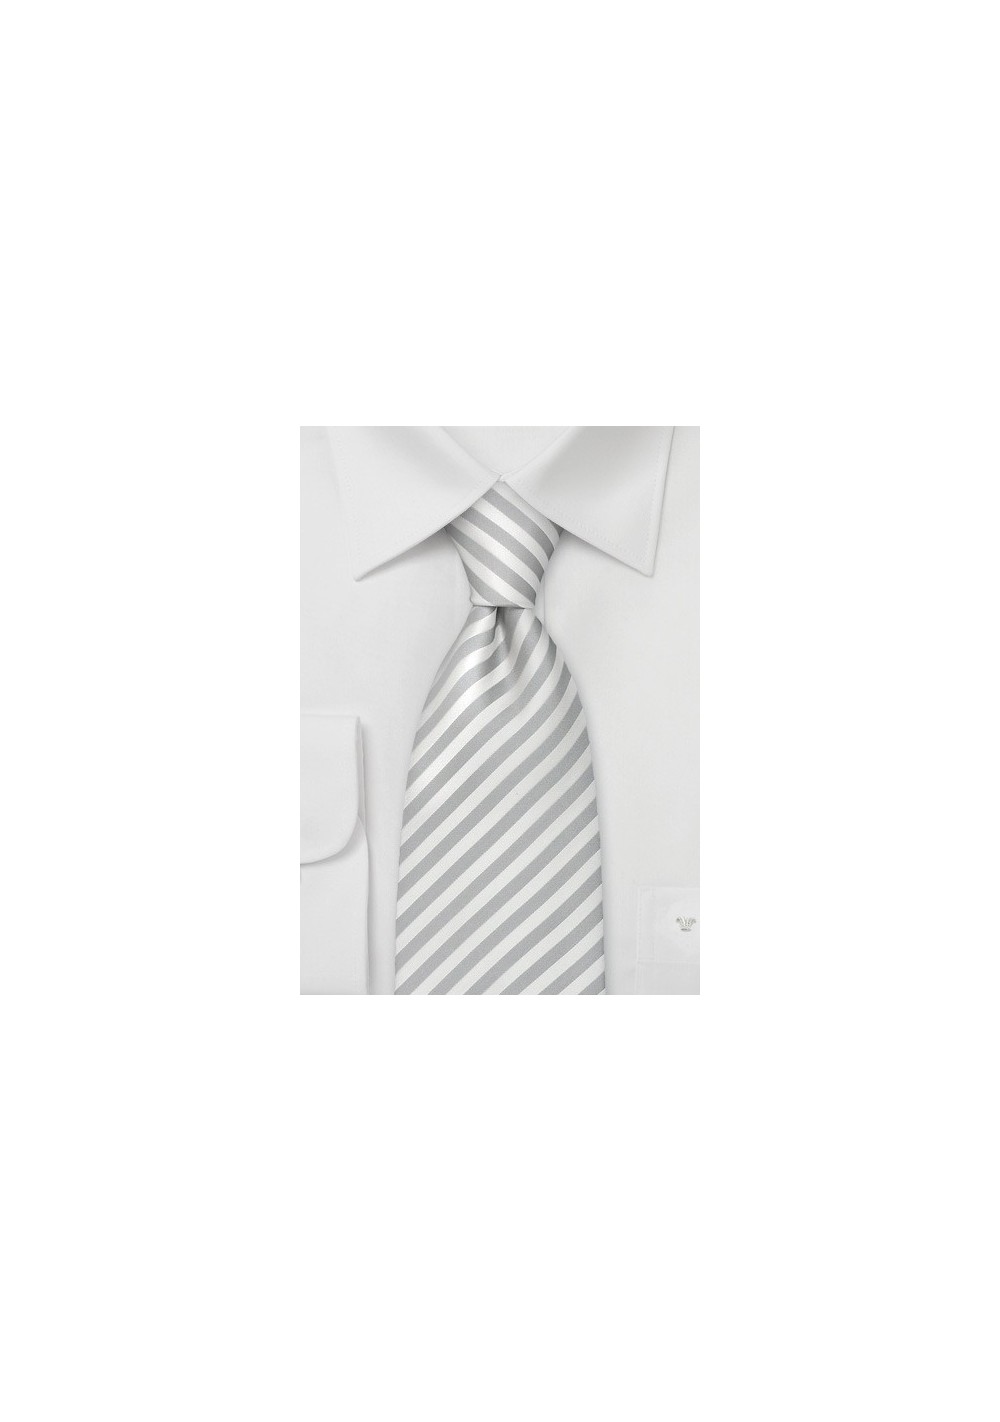 Formal Mens Ties - Striped Tie "Signals" by Parsley